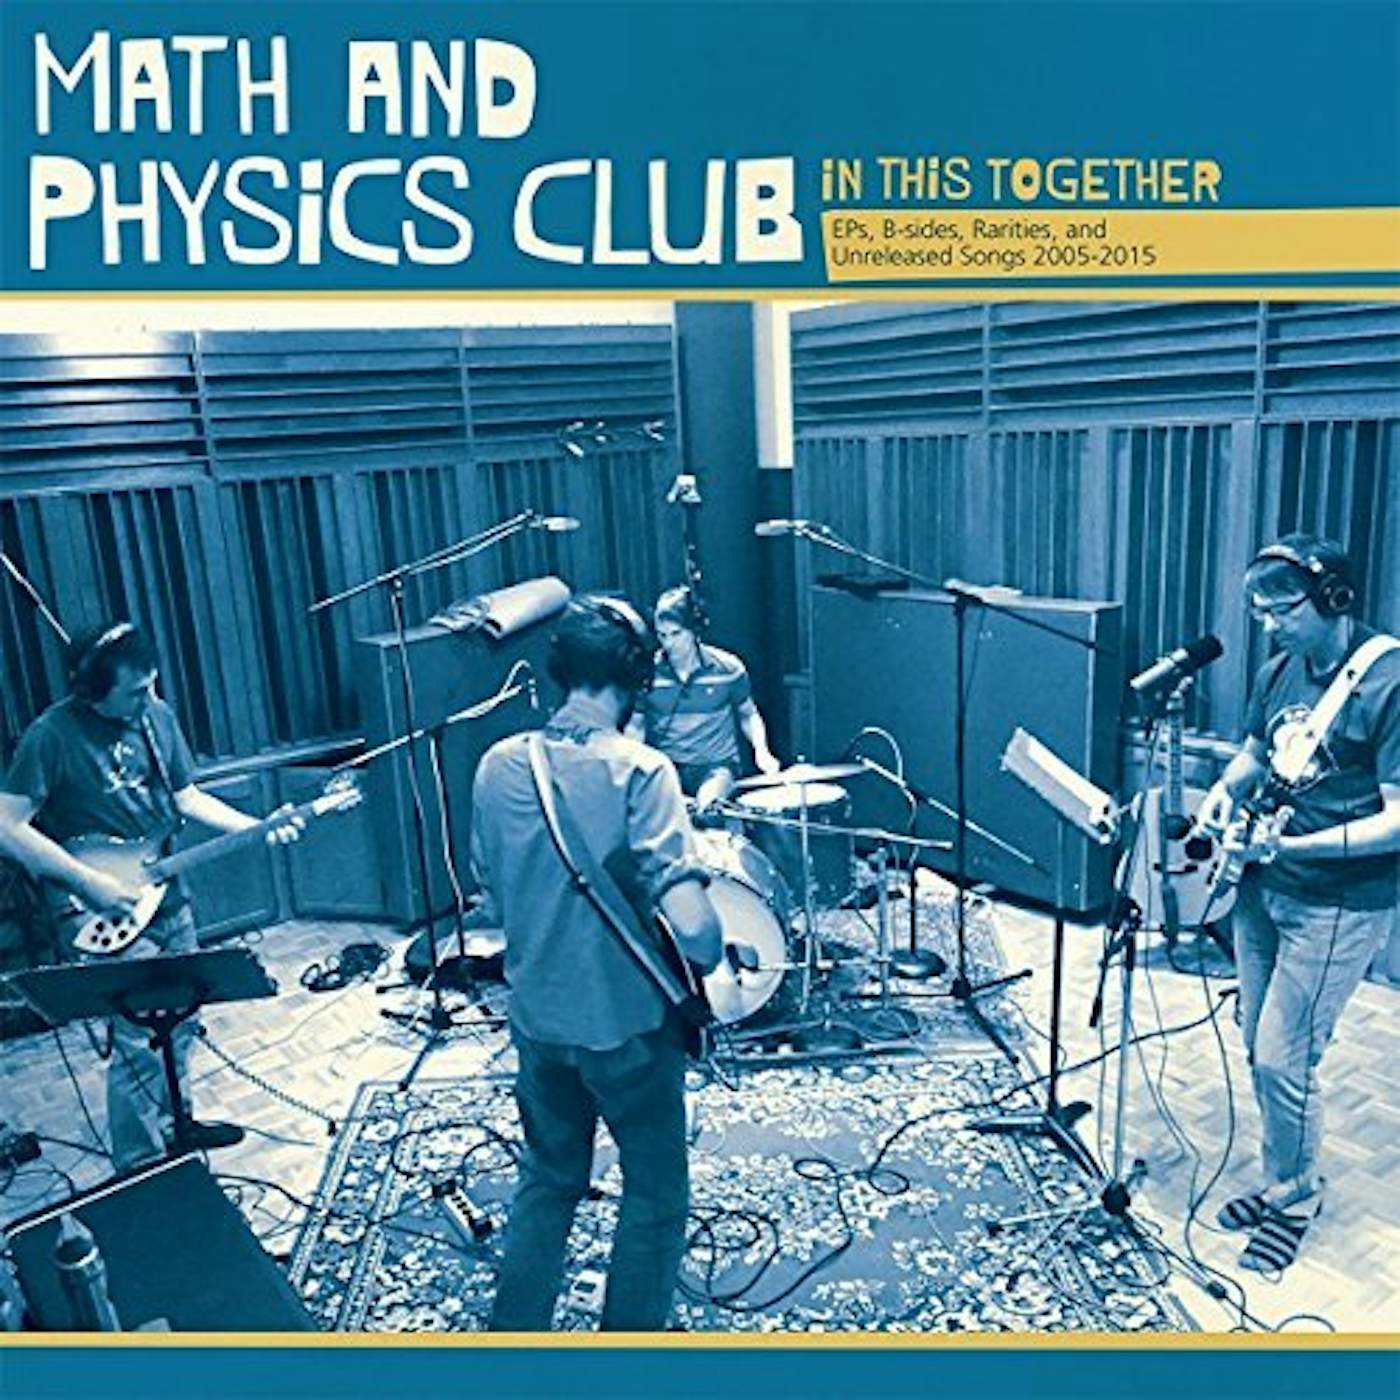 Math and Physics Club In This Together Vinyl Record